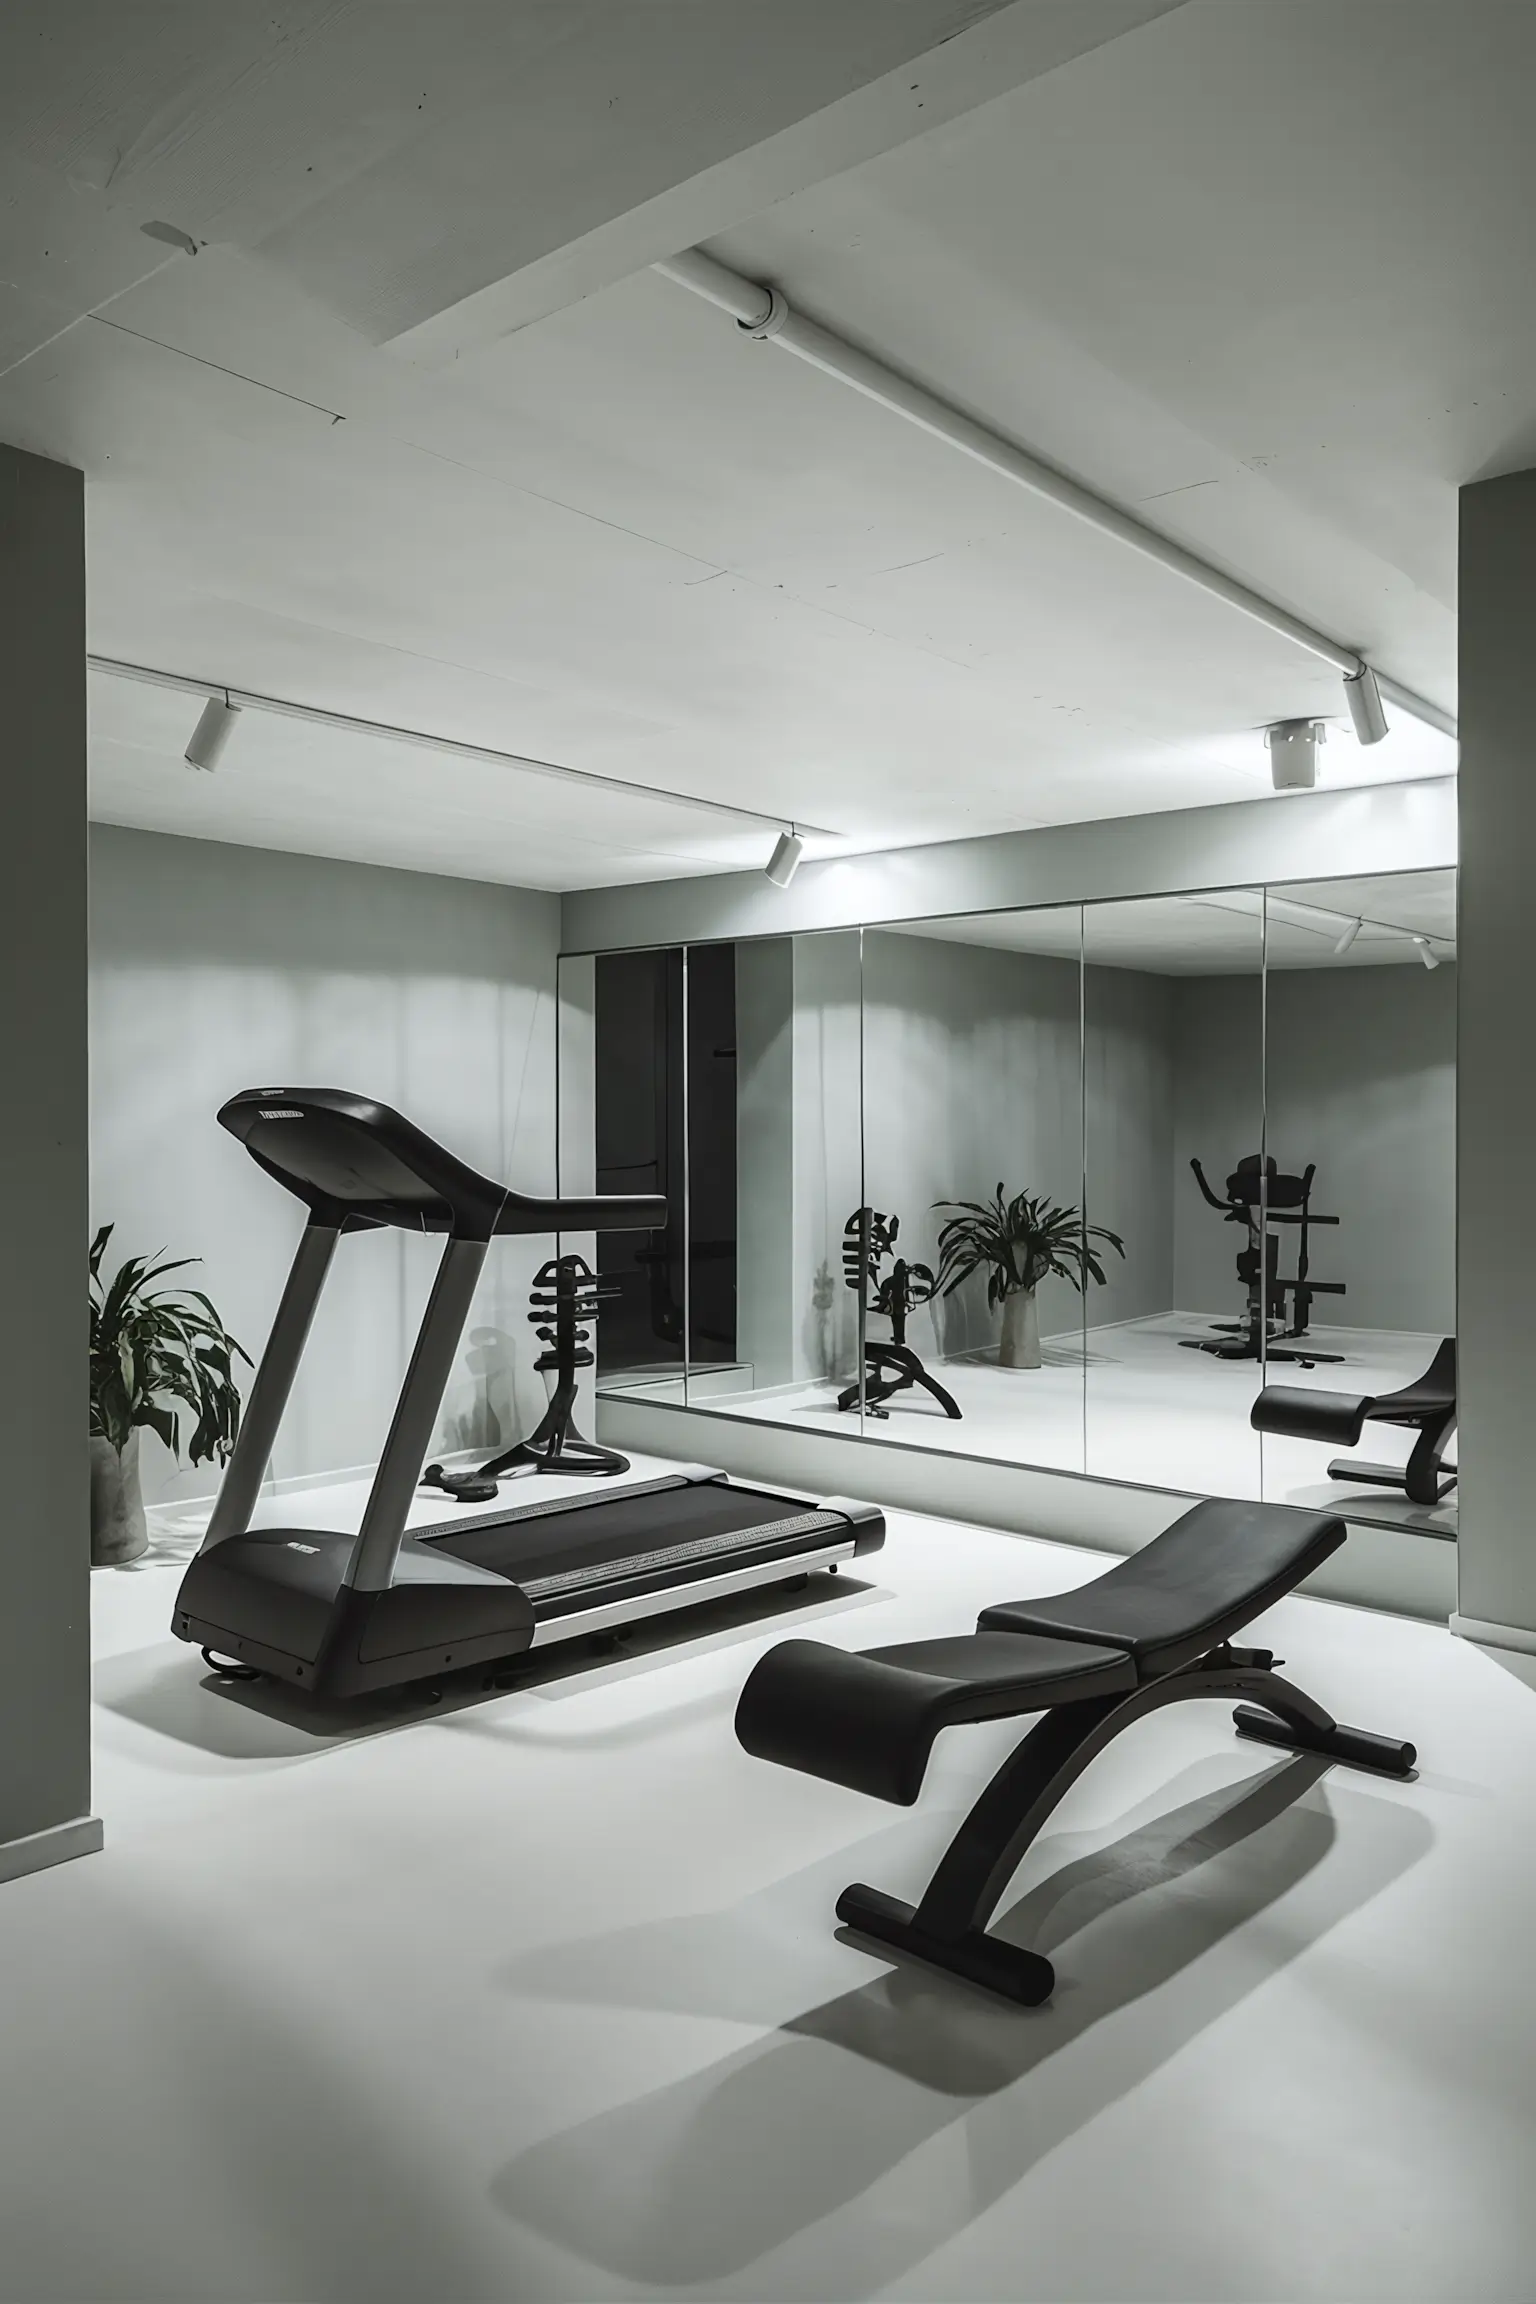 Minimalistic basement gym with modern fitness equipment and motivational wall art.